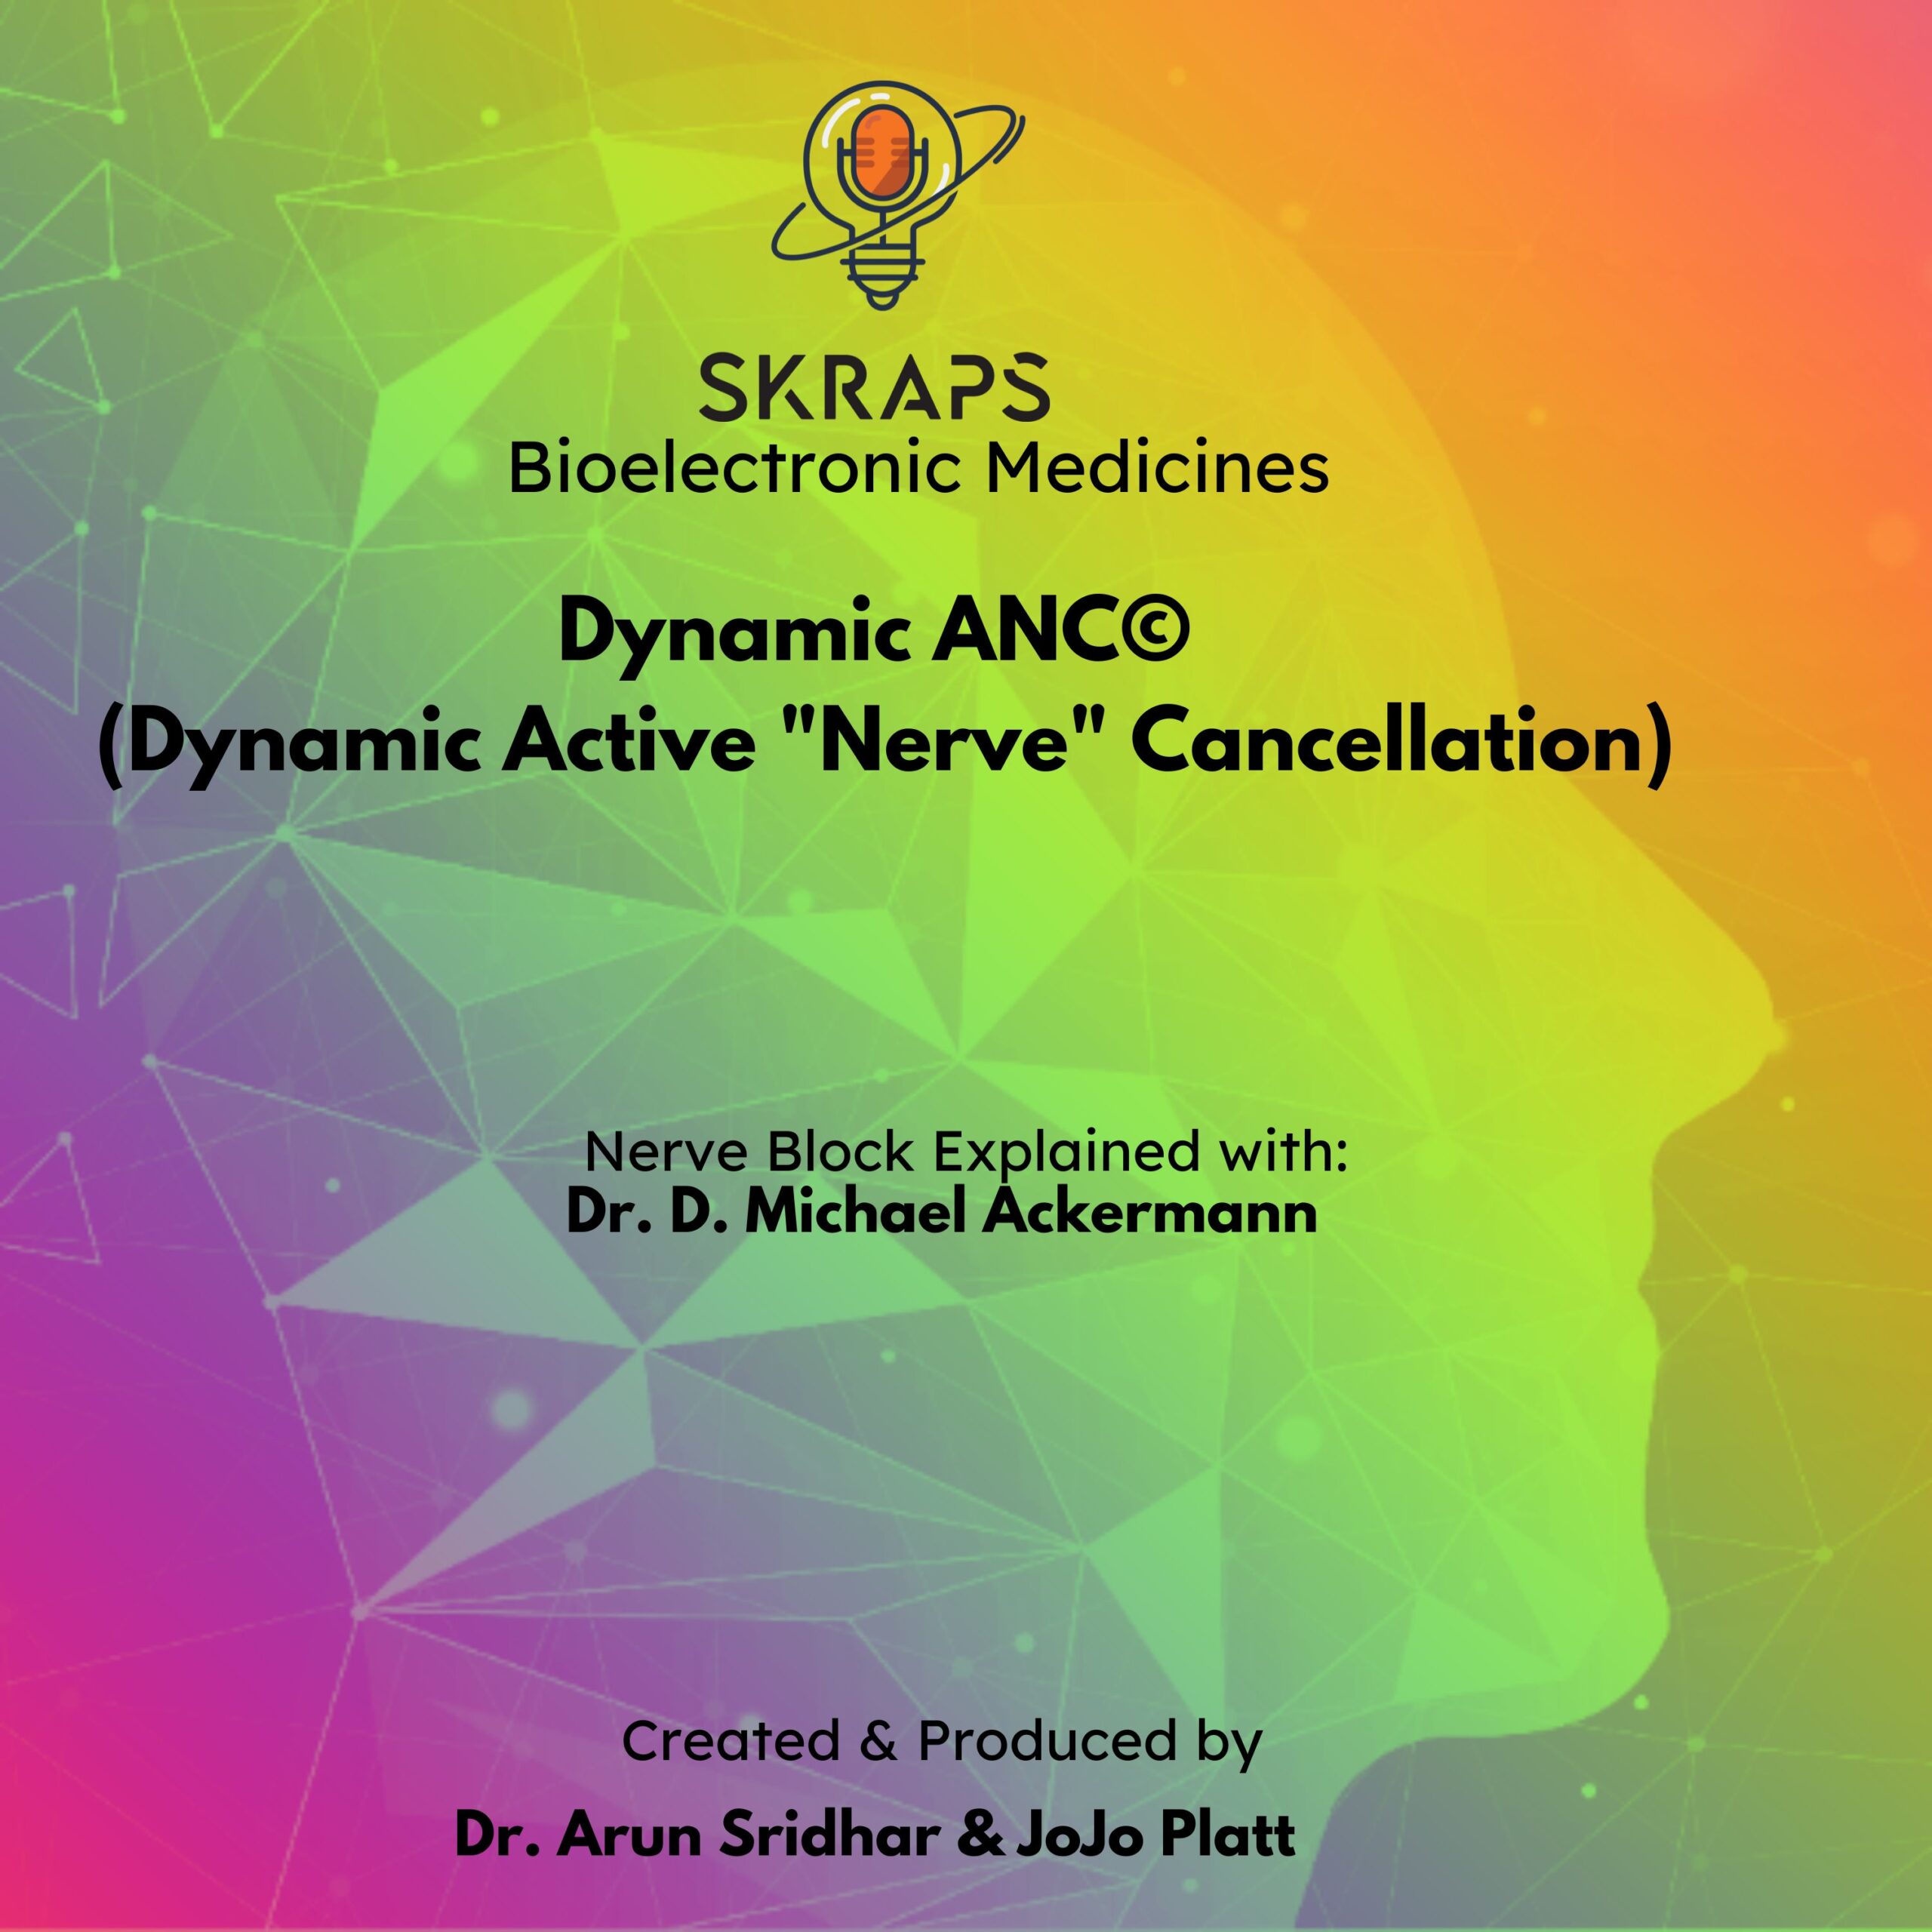 It’s time for DANC – “Dynamic ANC (Active “Nerve” Cancellation)”